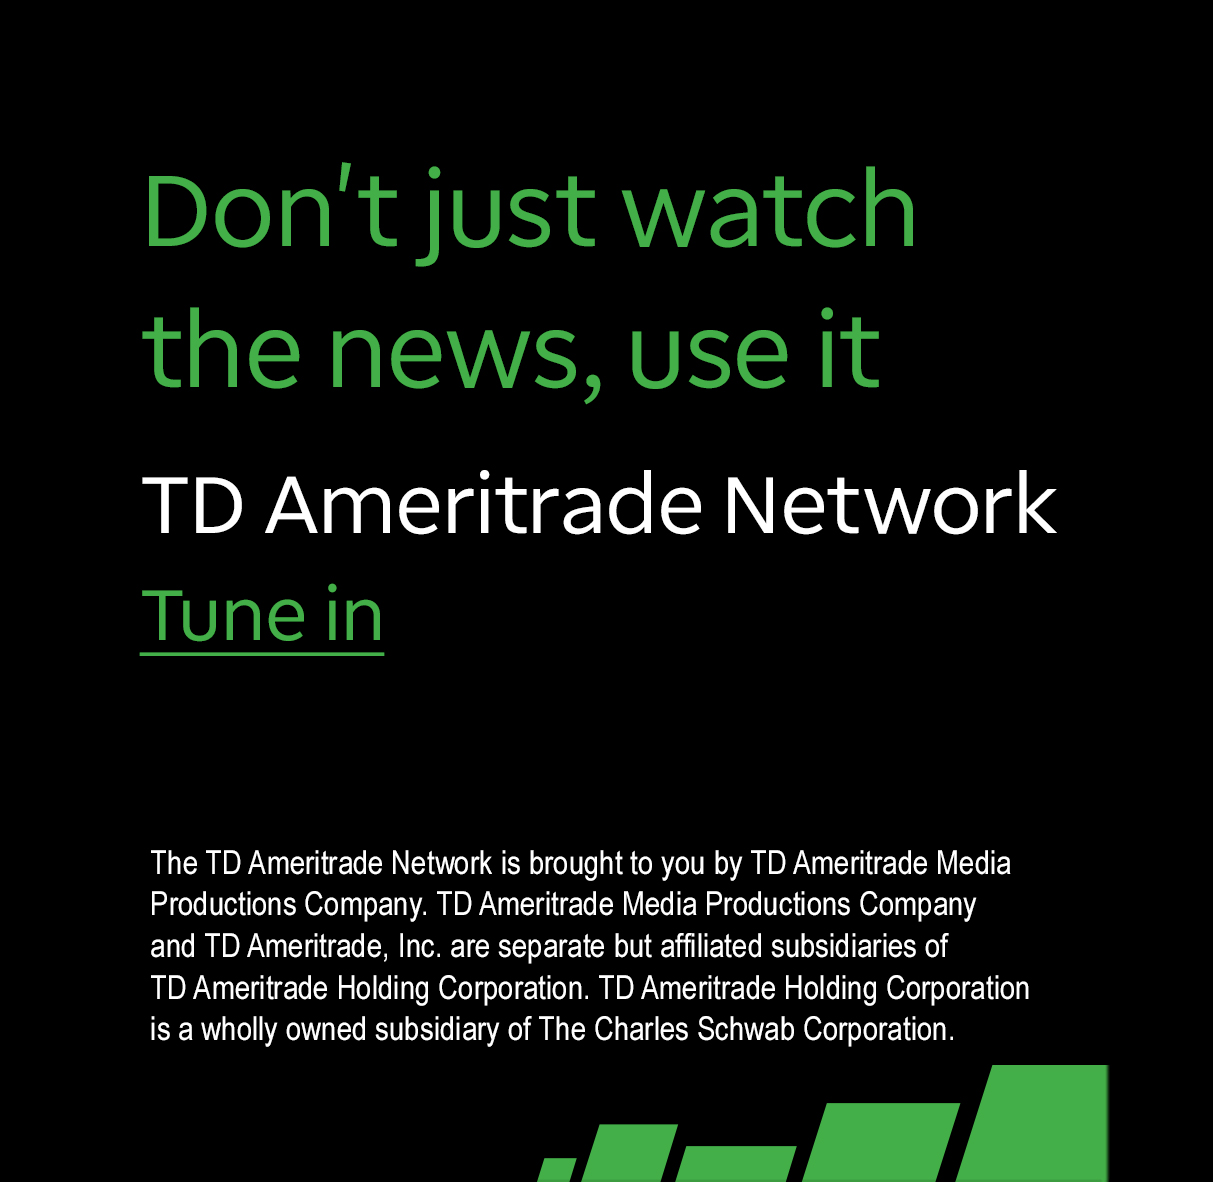 open an account with td ameritrade cant open thinkorswim